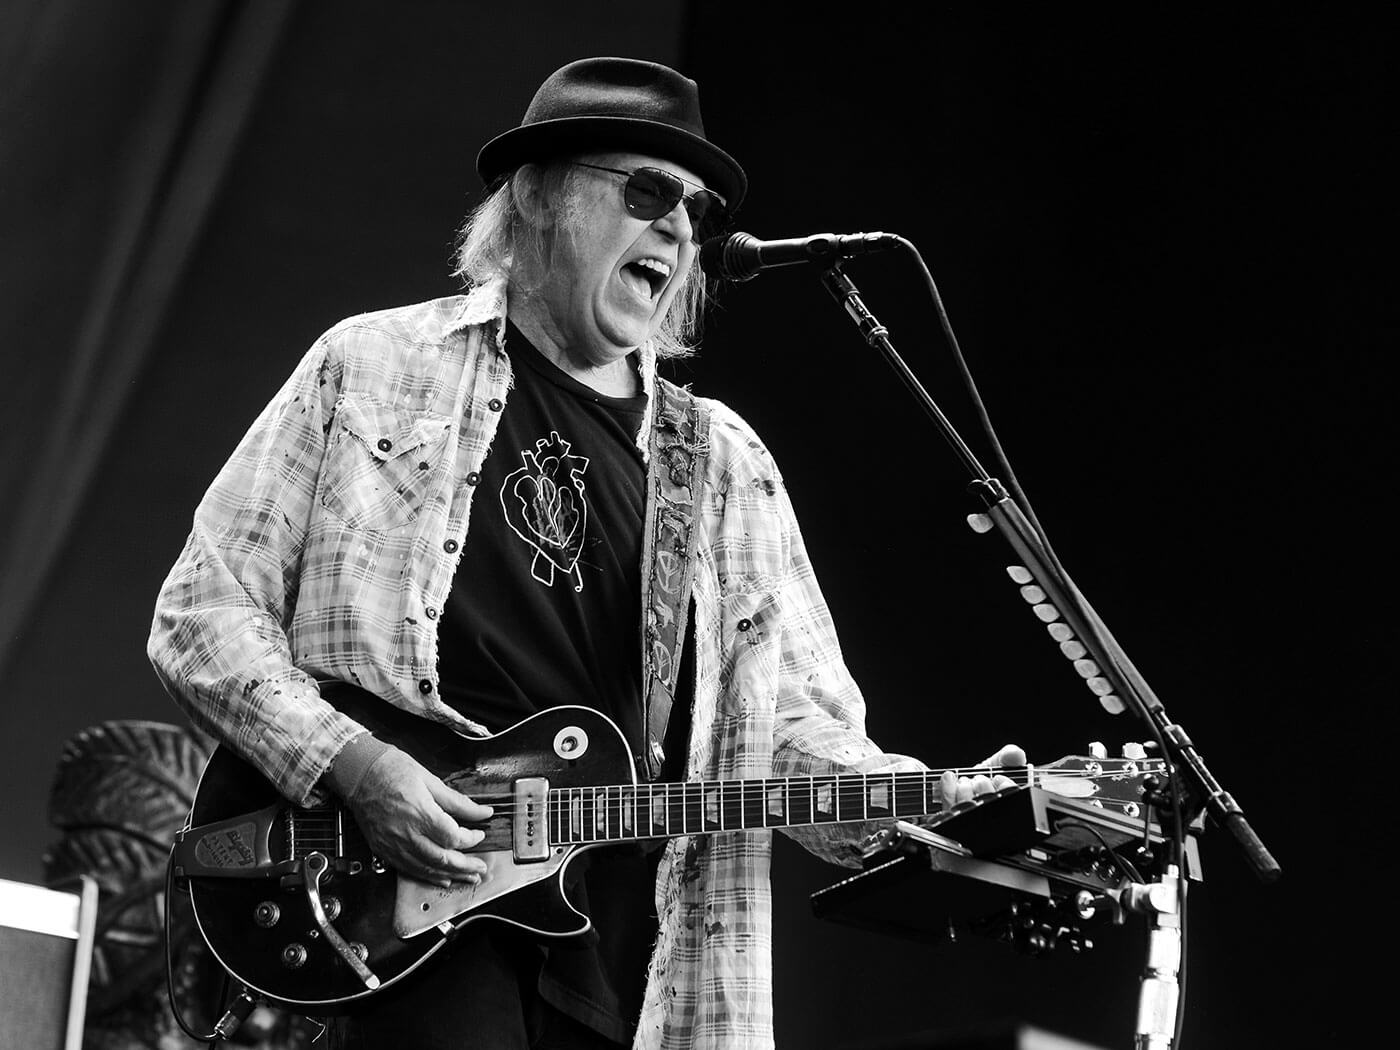 will neil young ever tour again